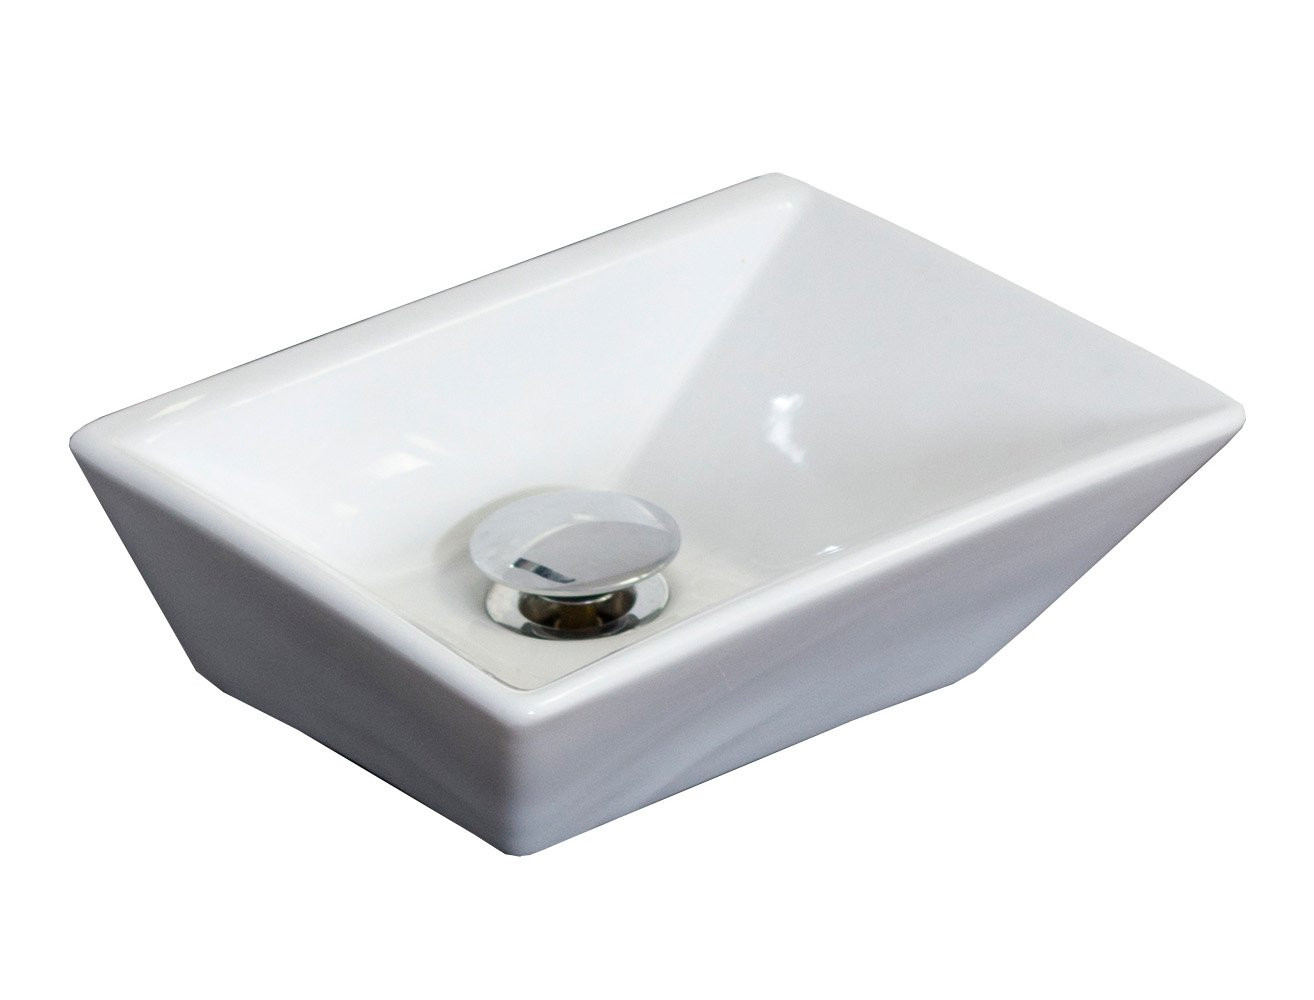 American Imagination AI-1243 Above Counter Rectangle Vessel In White Color For Deck Mount Faucet